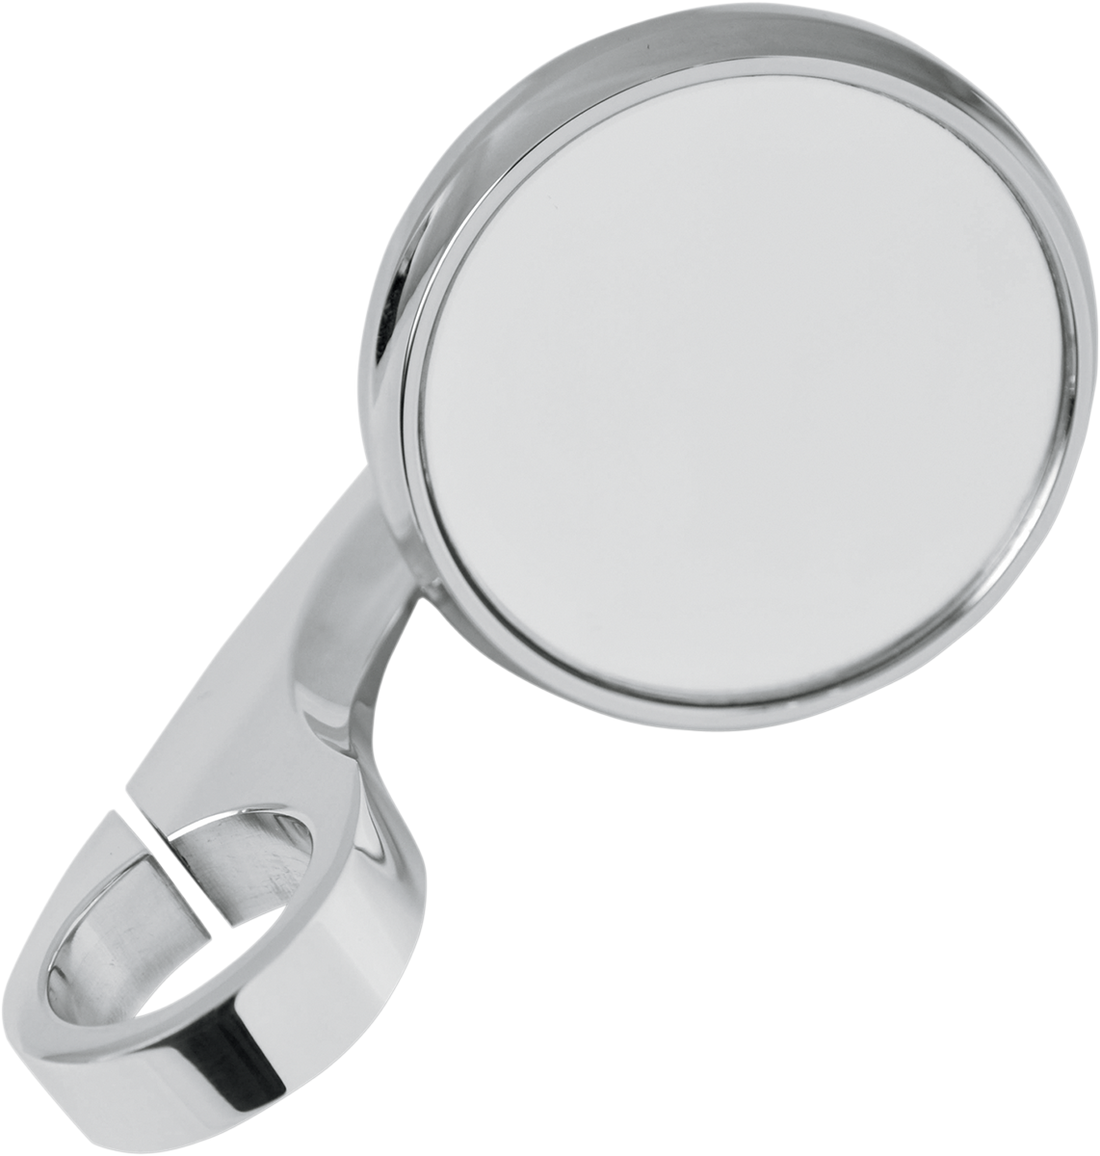 0640-0750 - TODD'S CYCLE Shooter Mirror - 1.25" - Chrome 0640-0750